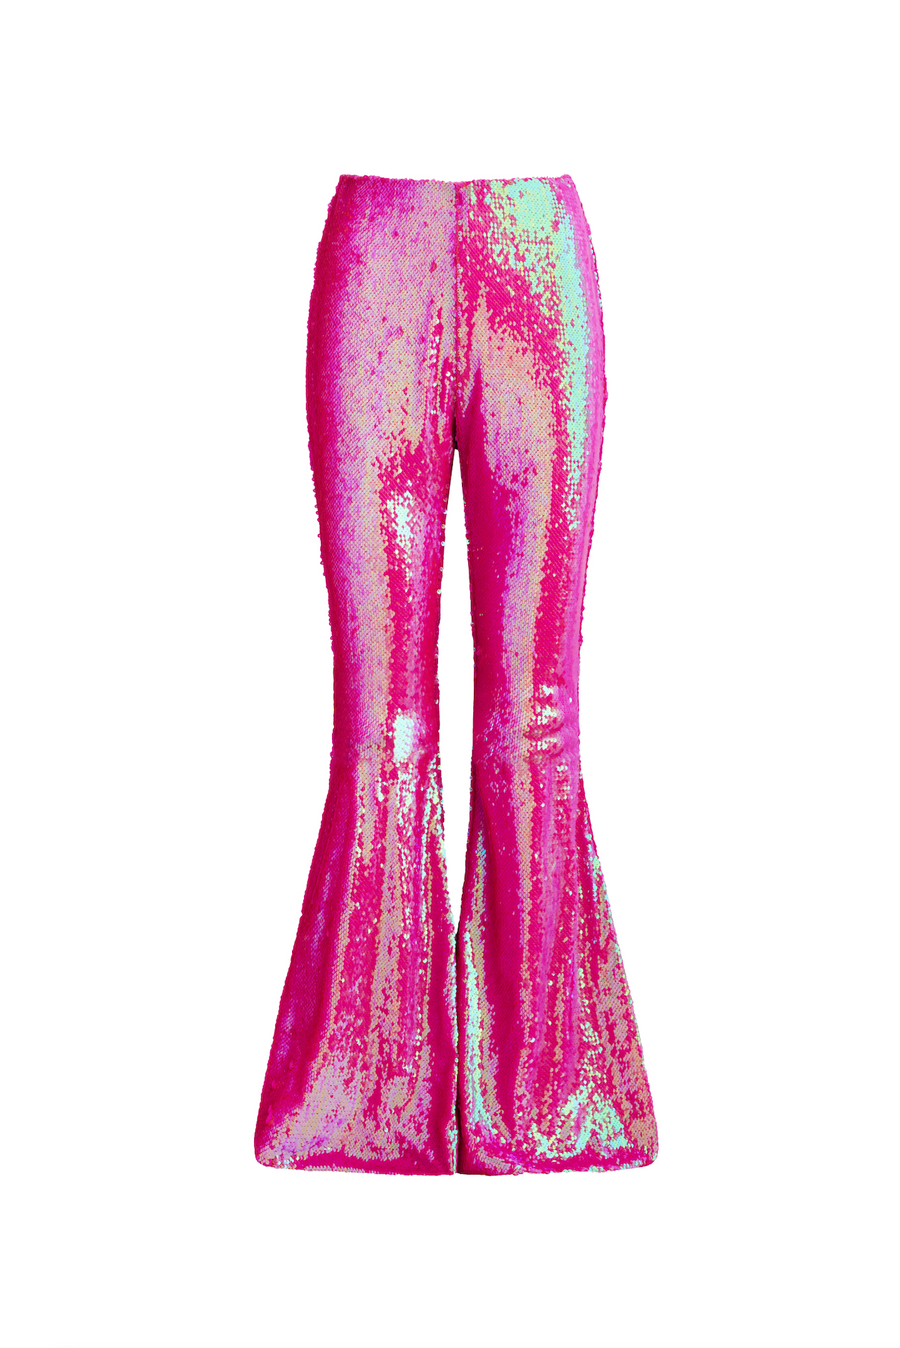 Petite Pink Sequin Flared Pants